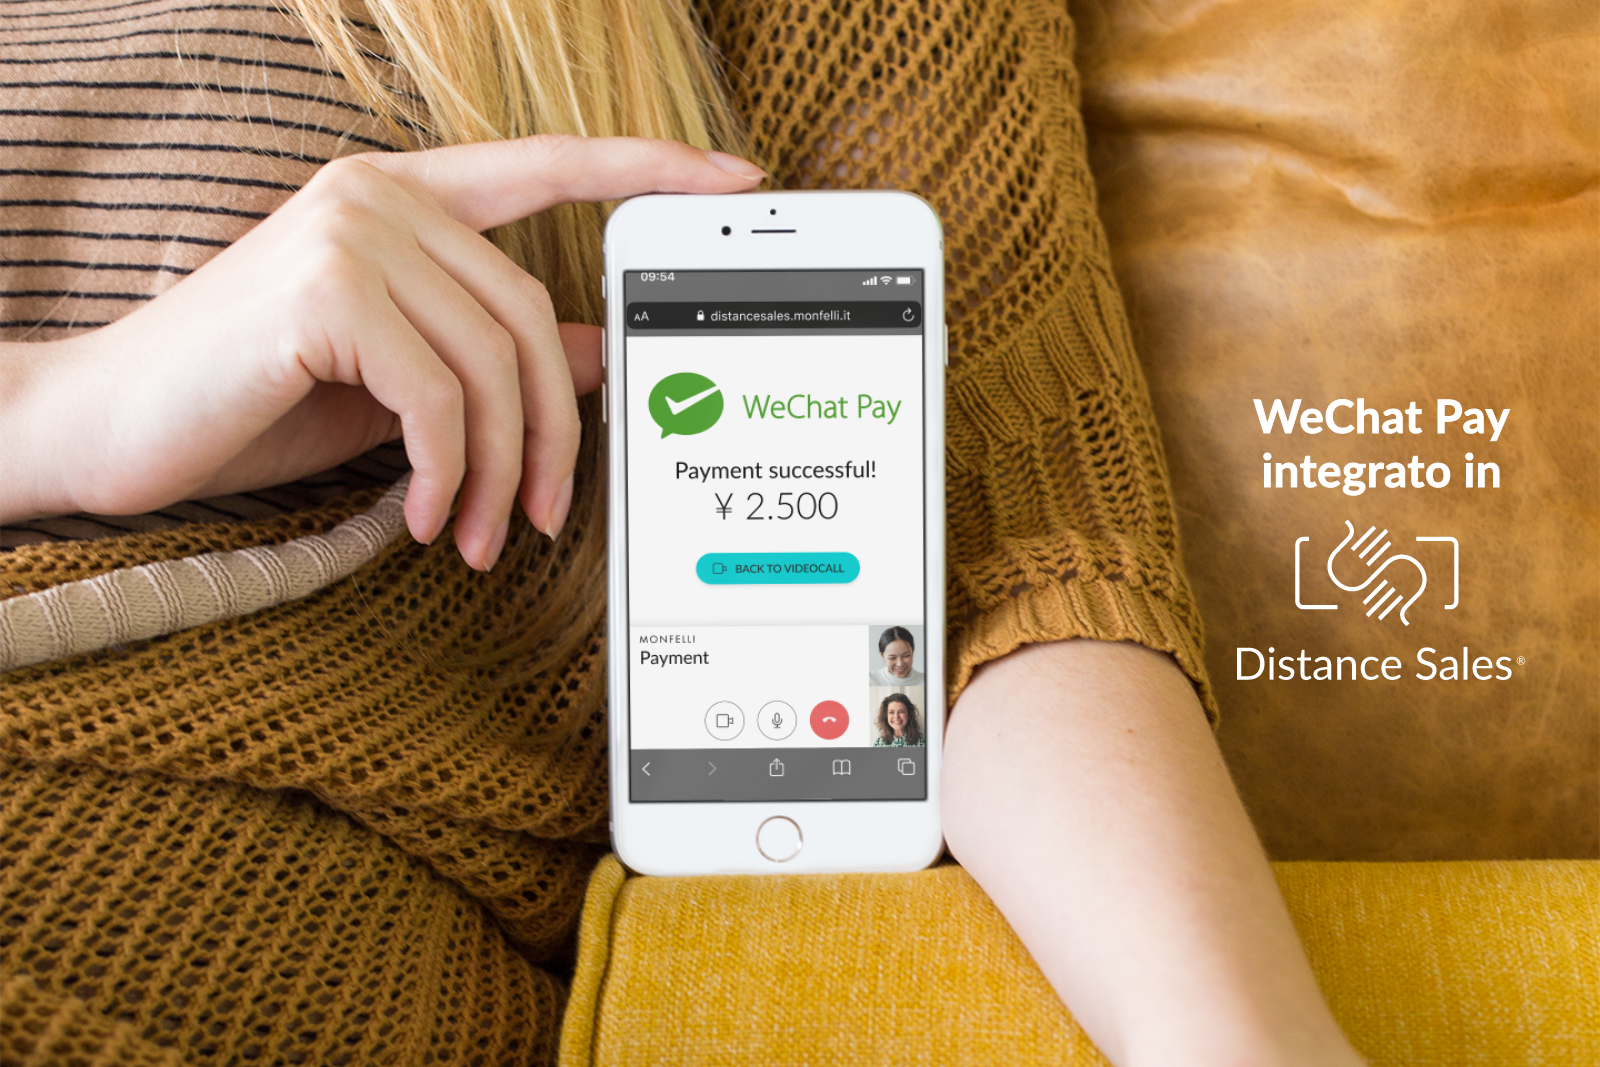 WeChat Pay integrato in Distance Sales